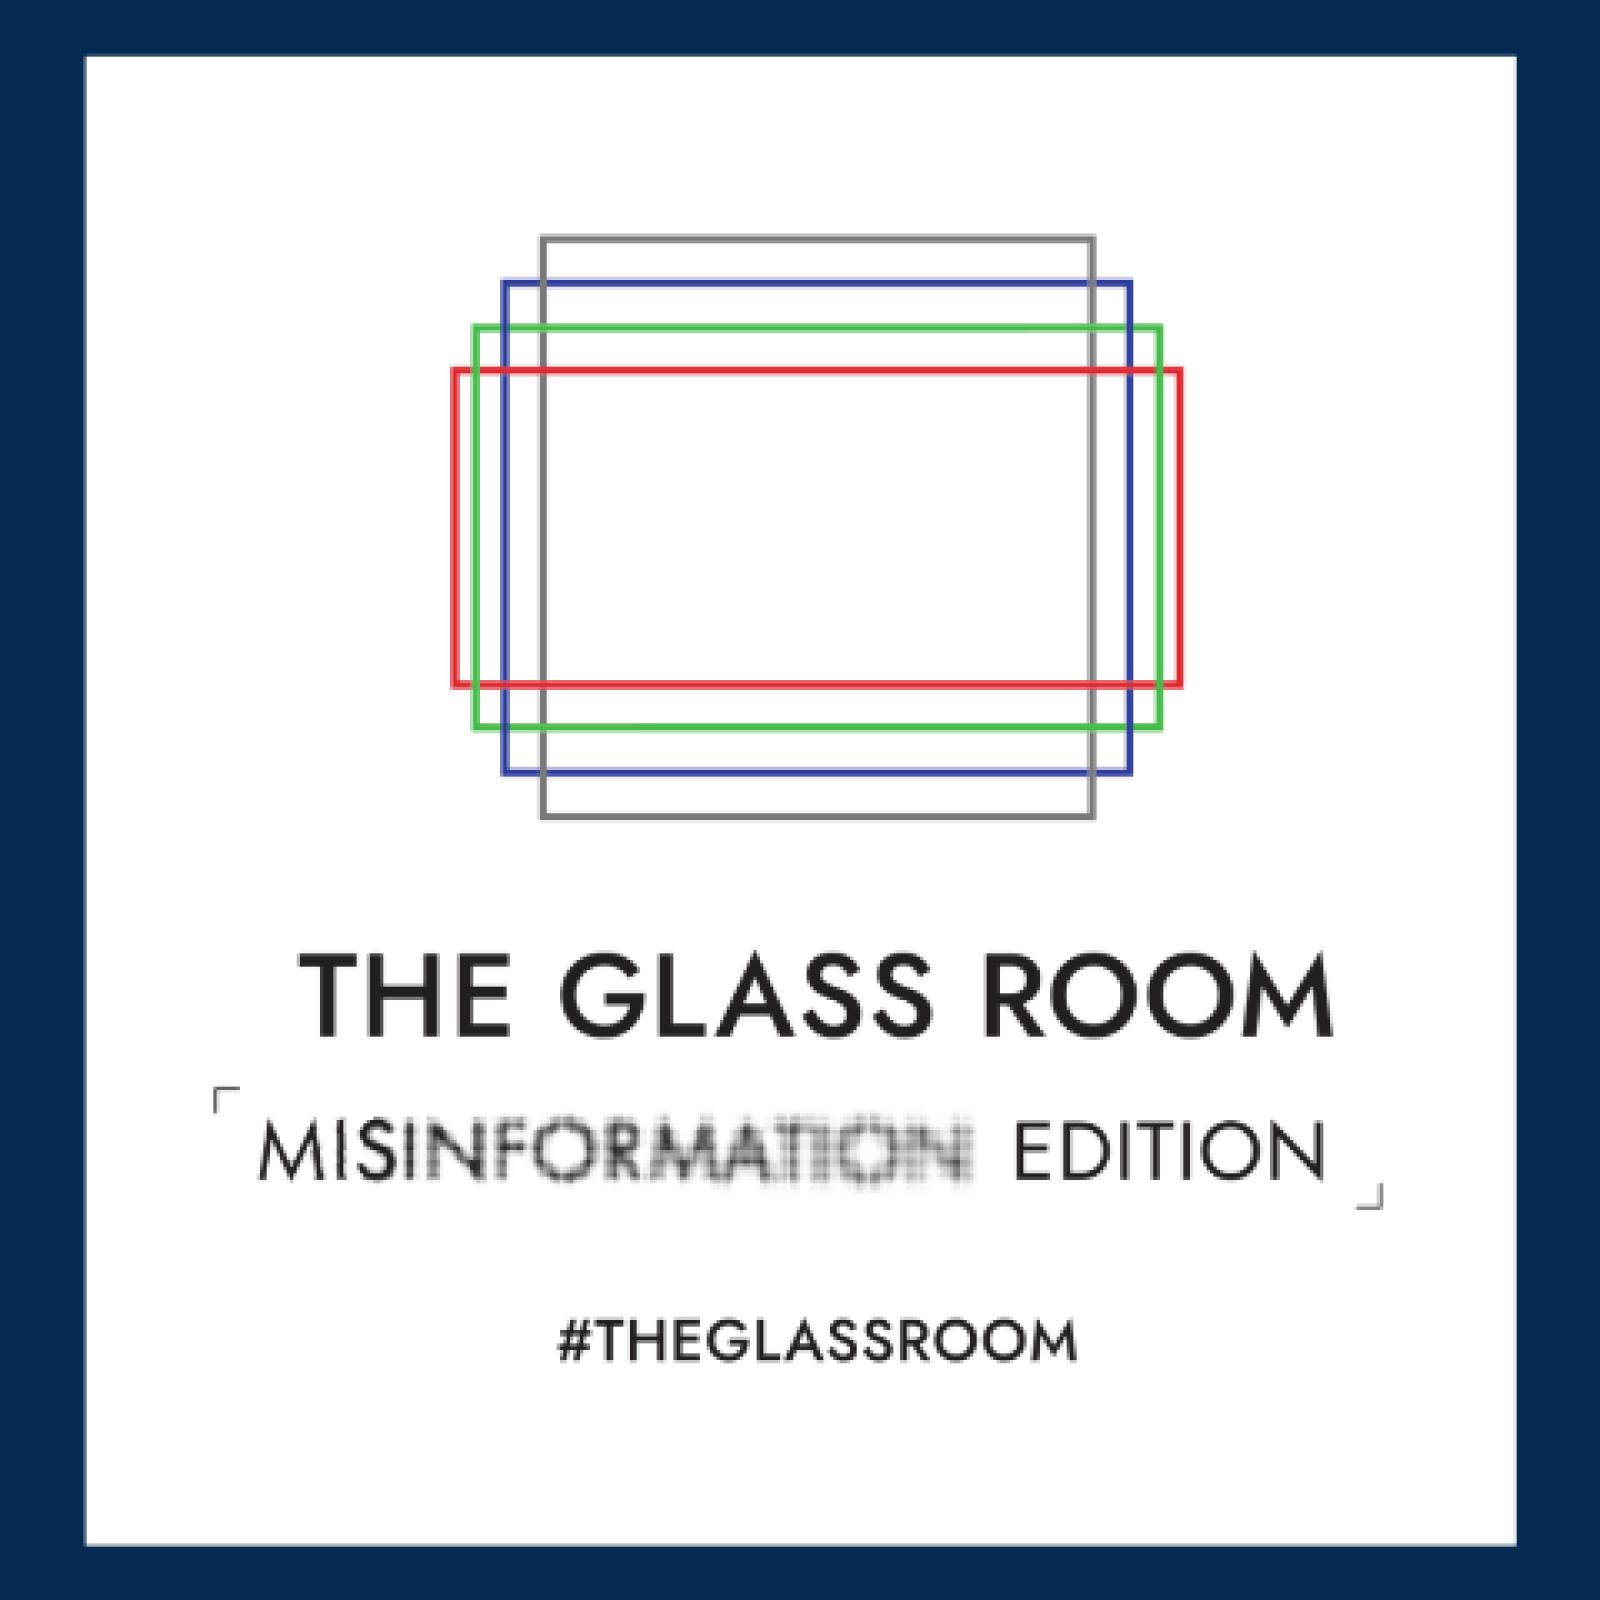 Glass Room Misinformation Edition Exhibition